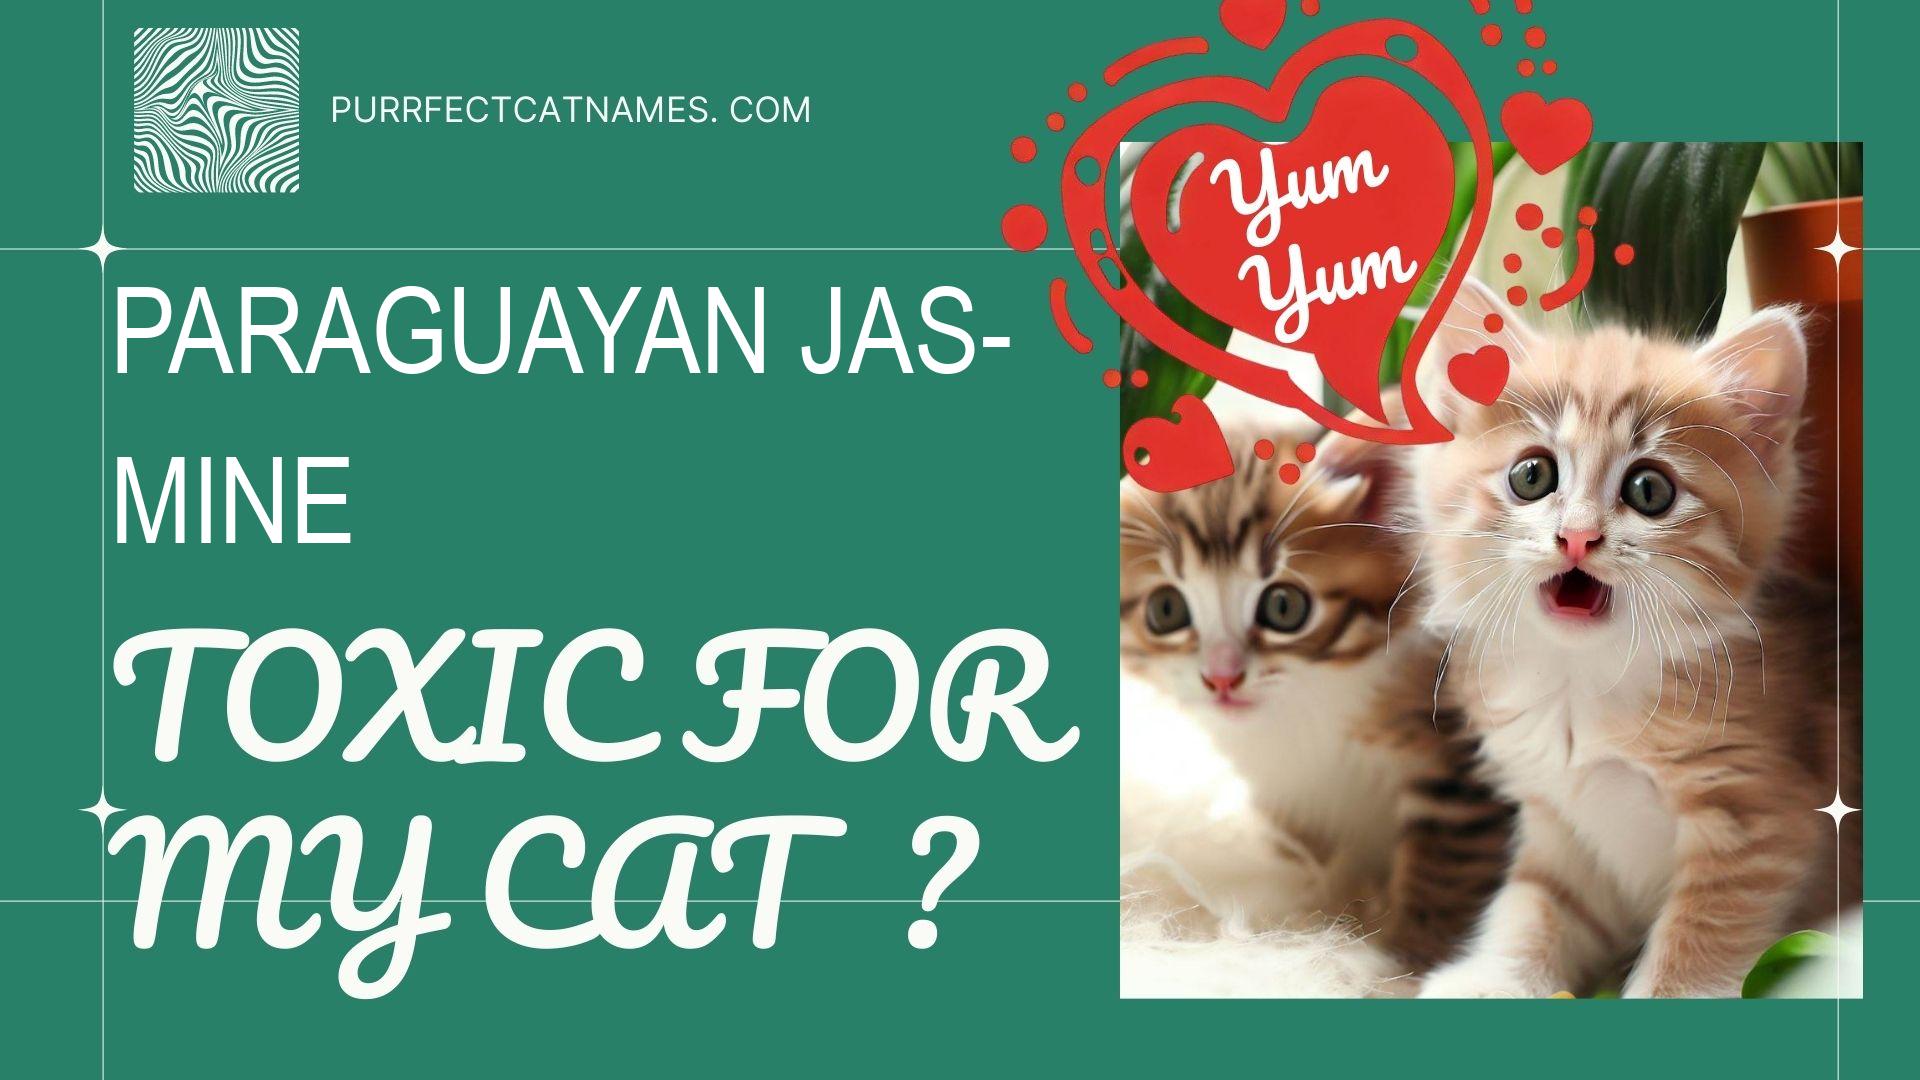 IsParaguayan Jasmine plant toxic for your cat